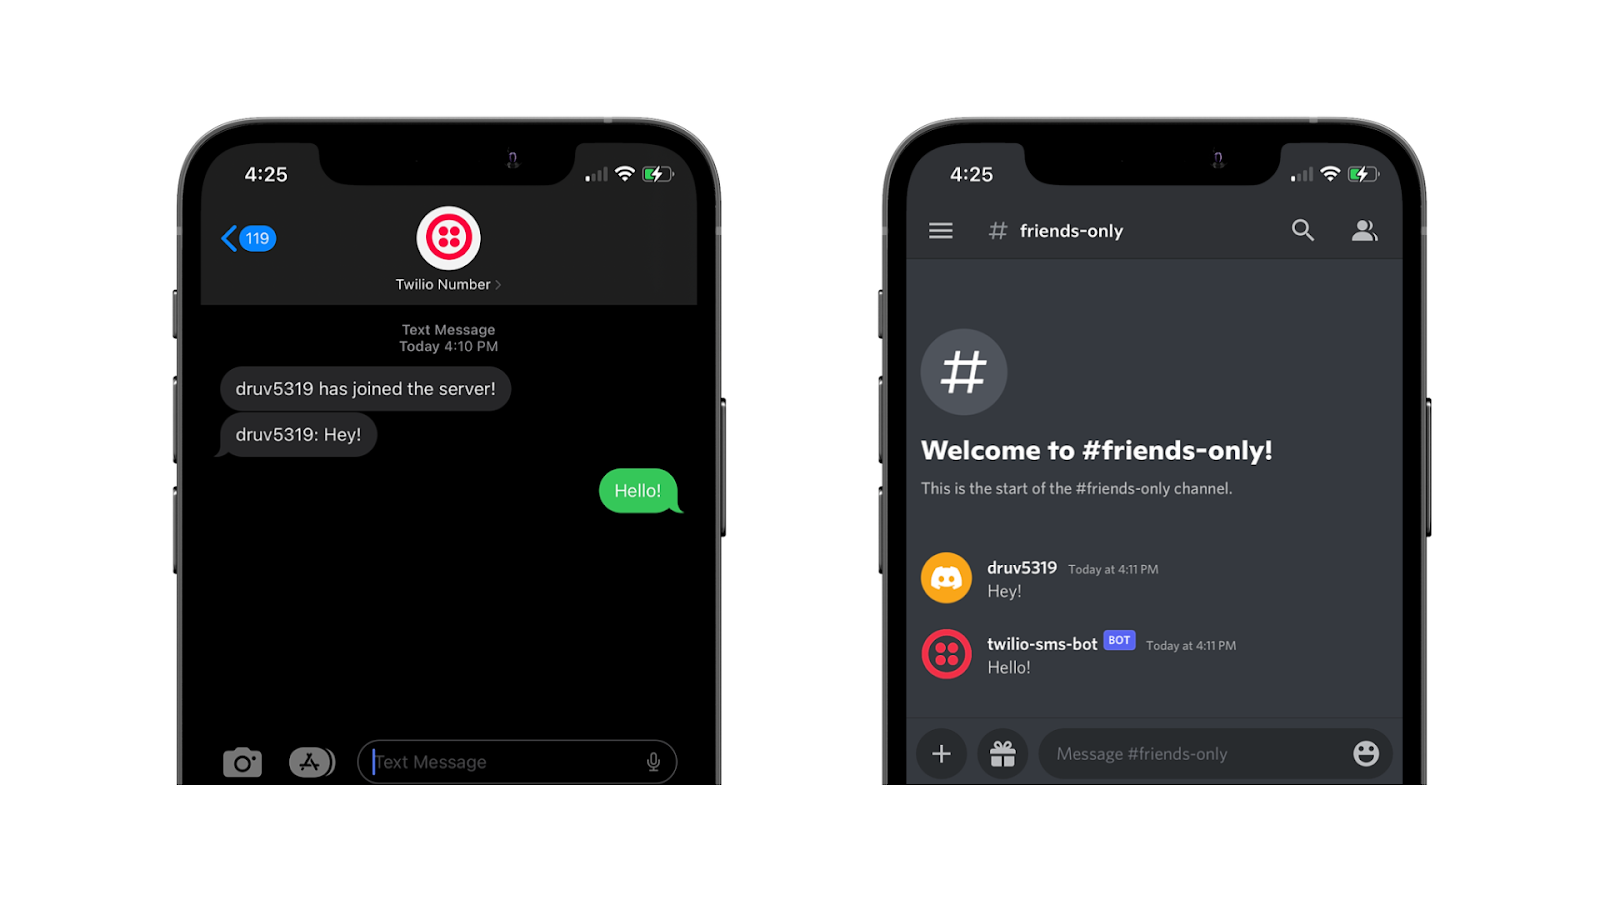 Phone screenshots of discord app and SMS app showing notification of new user joining and two way messaging